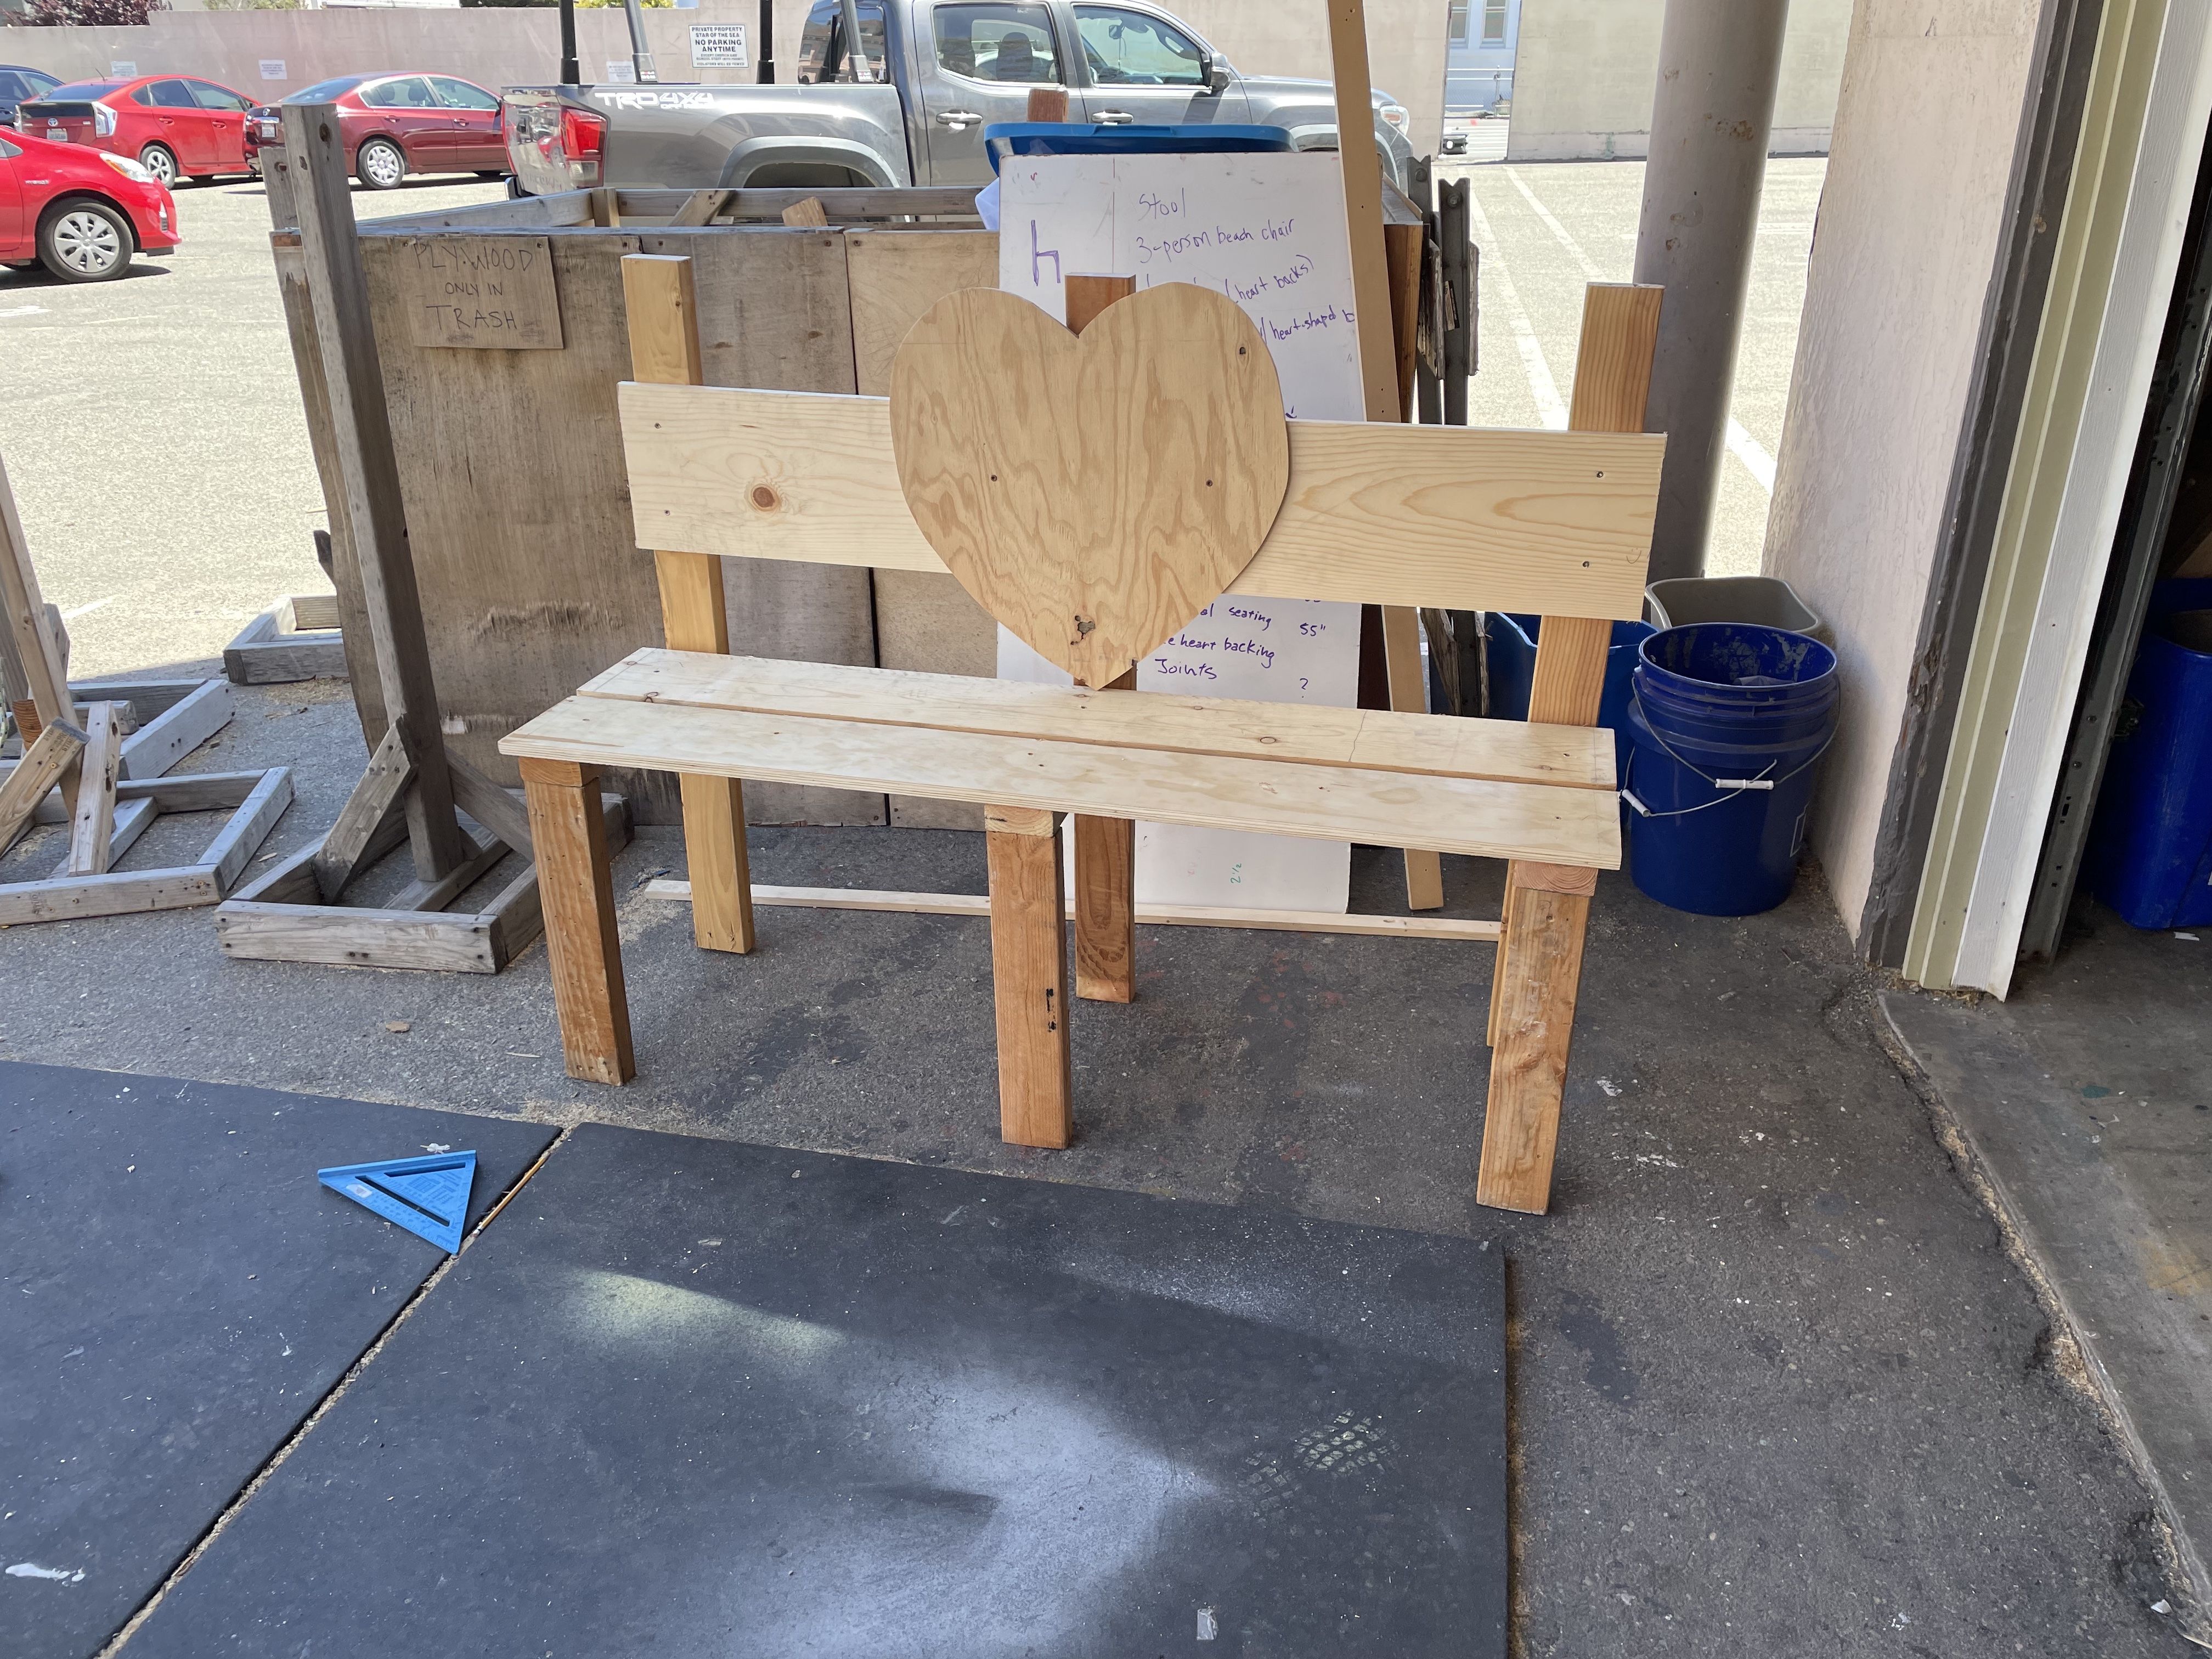 A bench with a heart attached the seat.